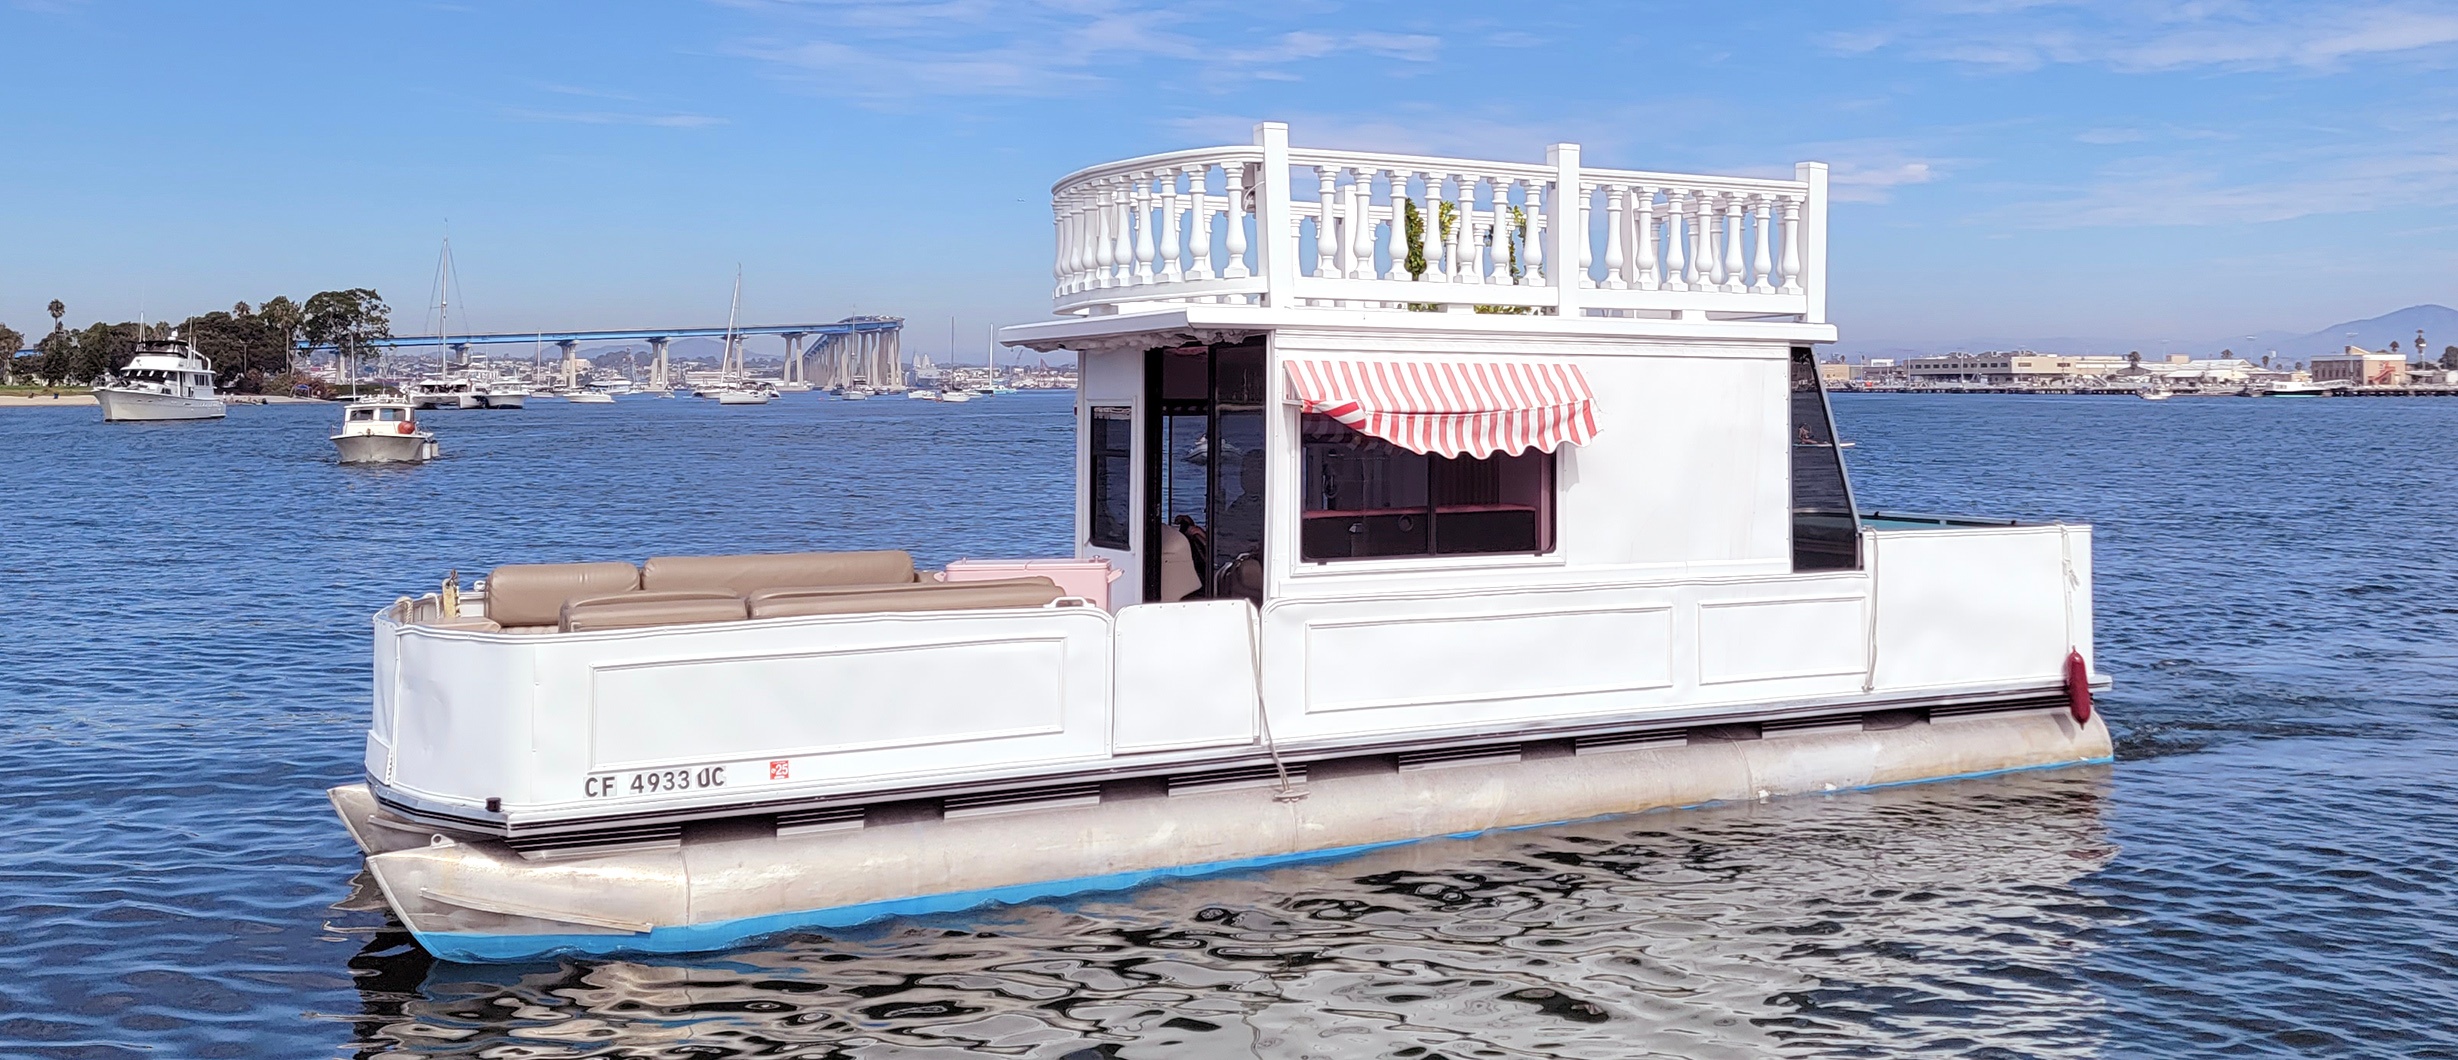 Insta-Worthy Wonderboat Rental with Inflatable Slide, Jungle-Themed Deck & More (BYOB) image 19